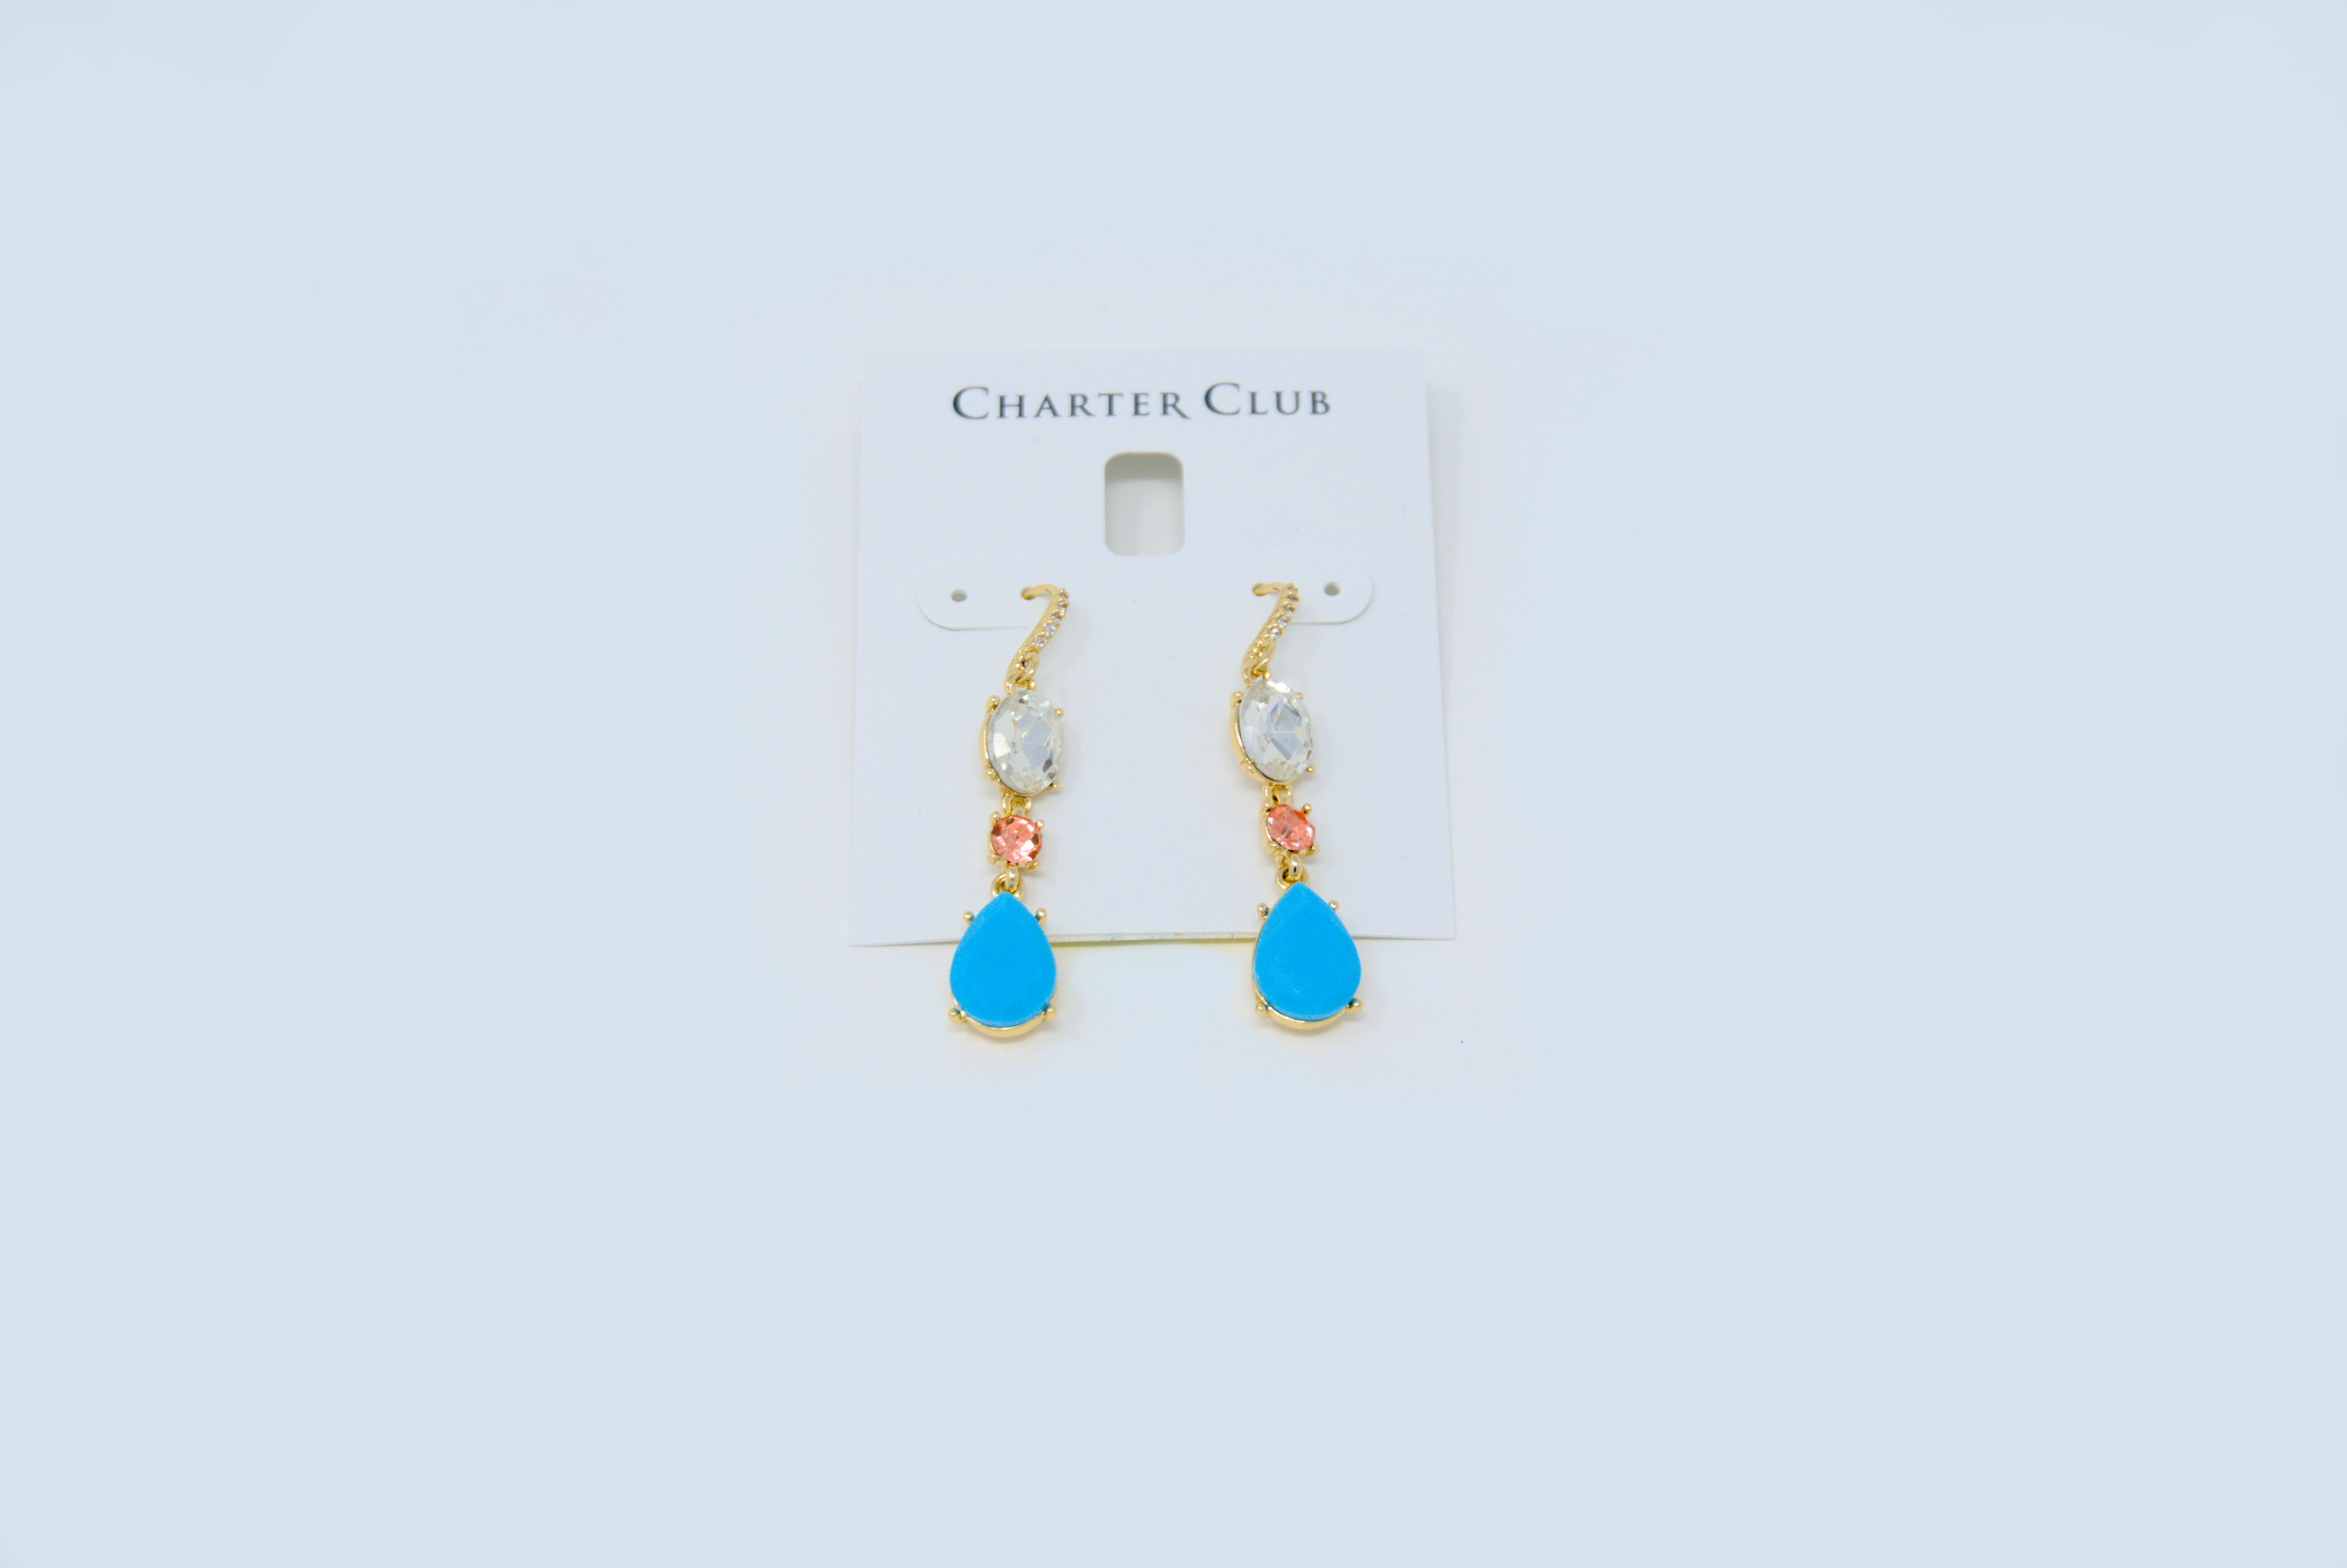 Charm & Lovely Quality Fashion Accessories introduces Charter Club Gold-Tone Crystal China Blue Drop Earrings